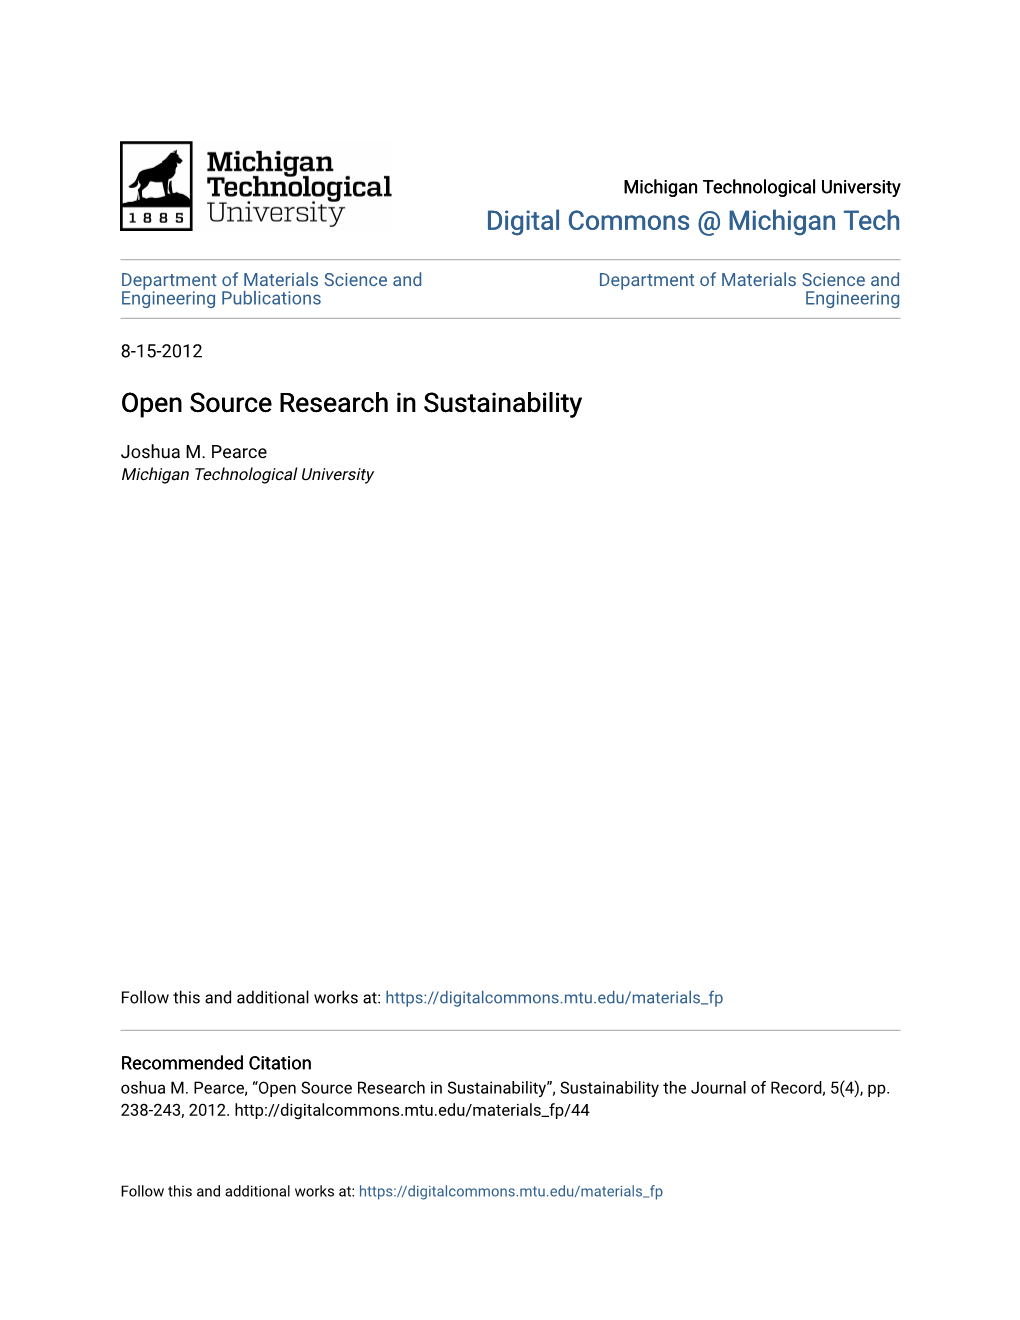 Open Source Research in Sustainability